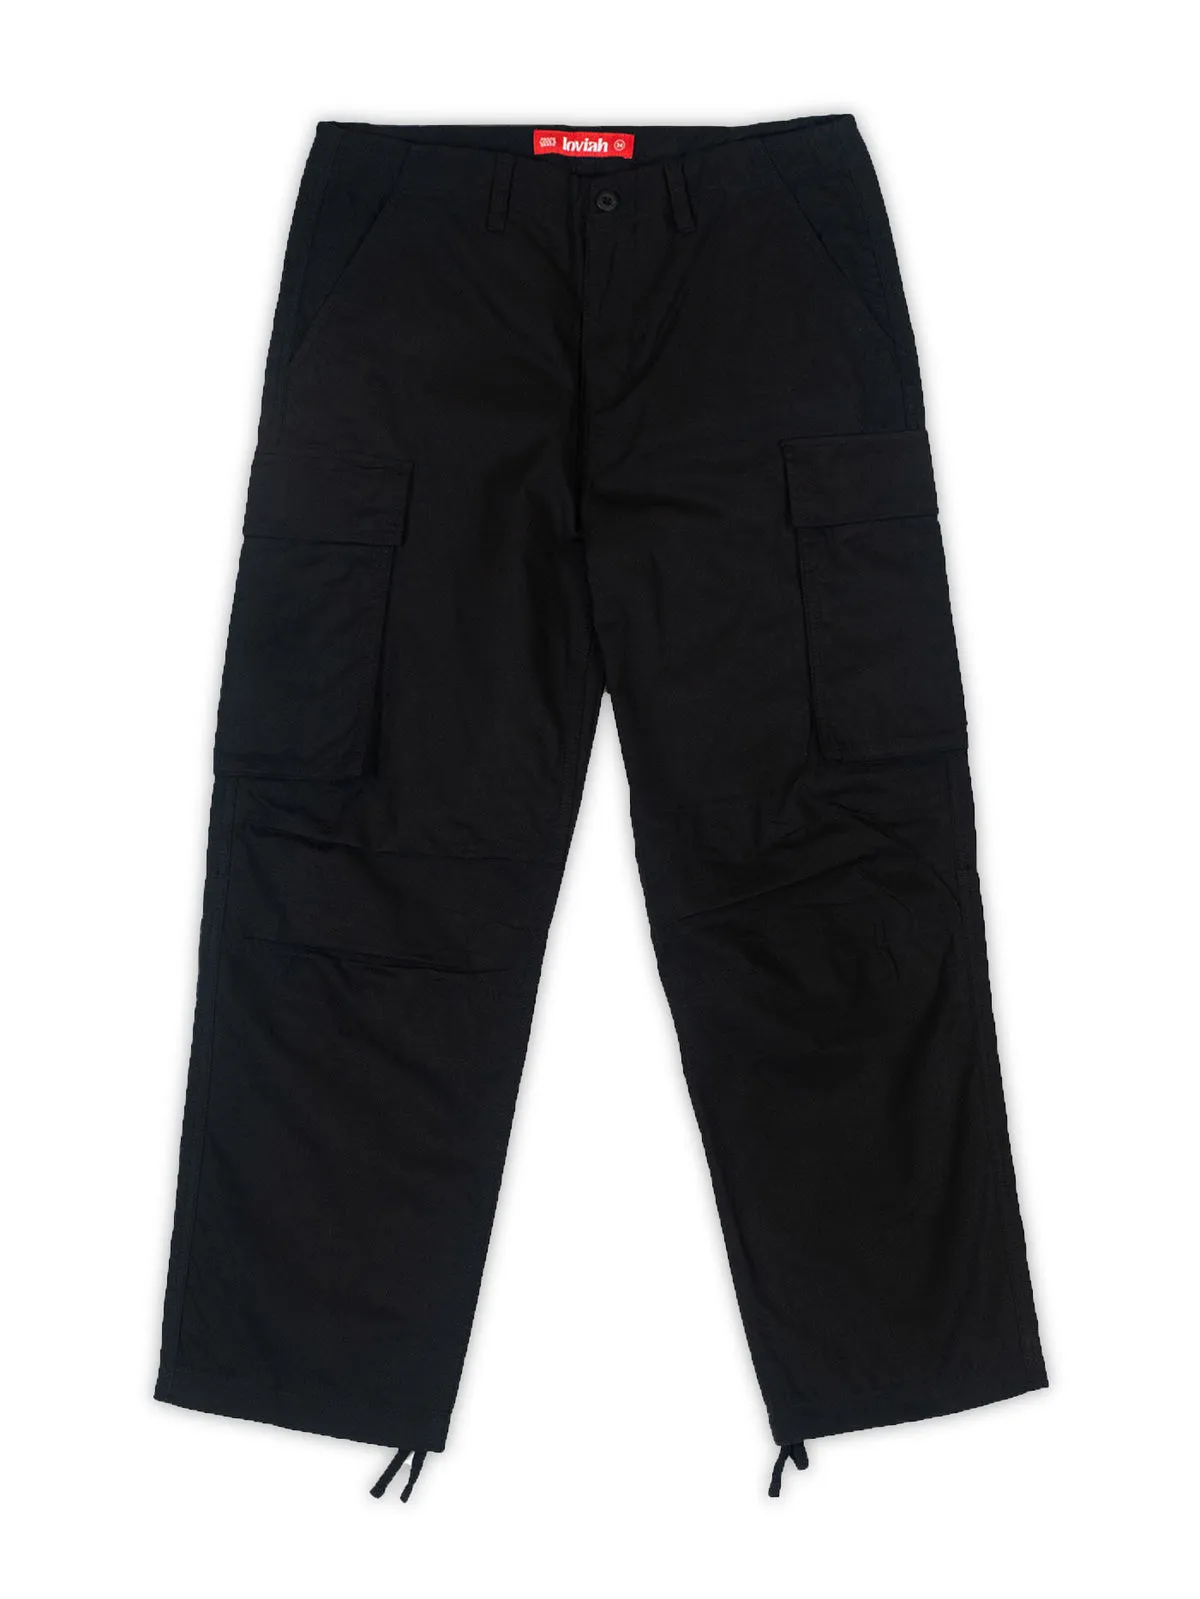 UNIQLO CARGO PANTS, Men's Fashion, Bottoms, Trousers on Carousell